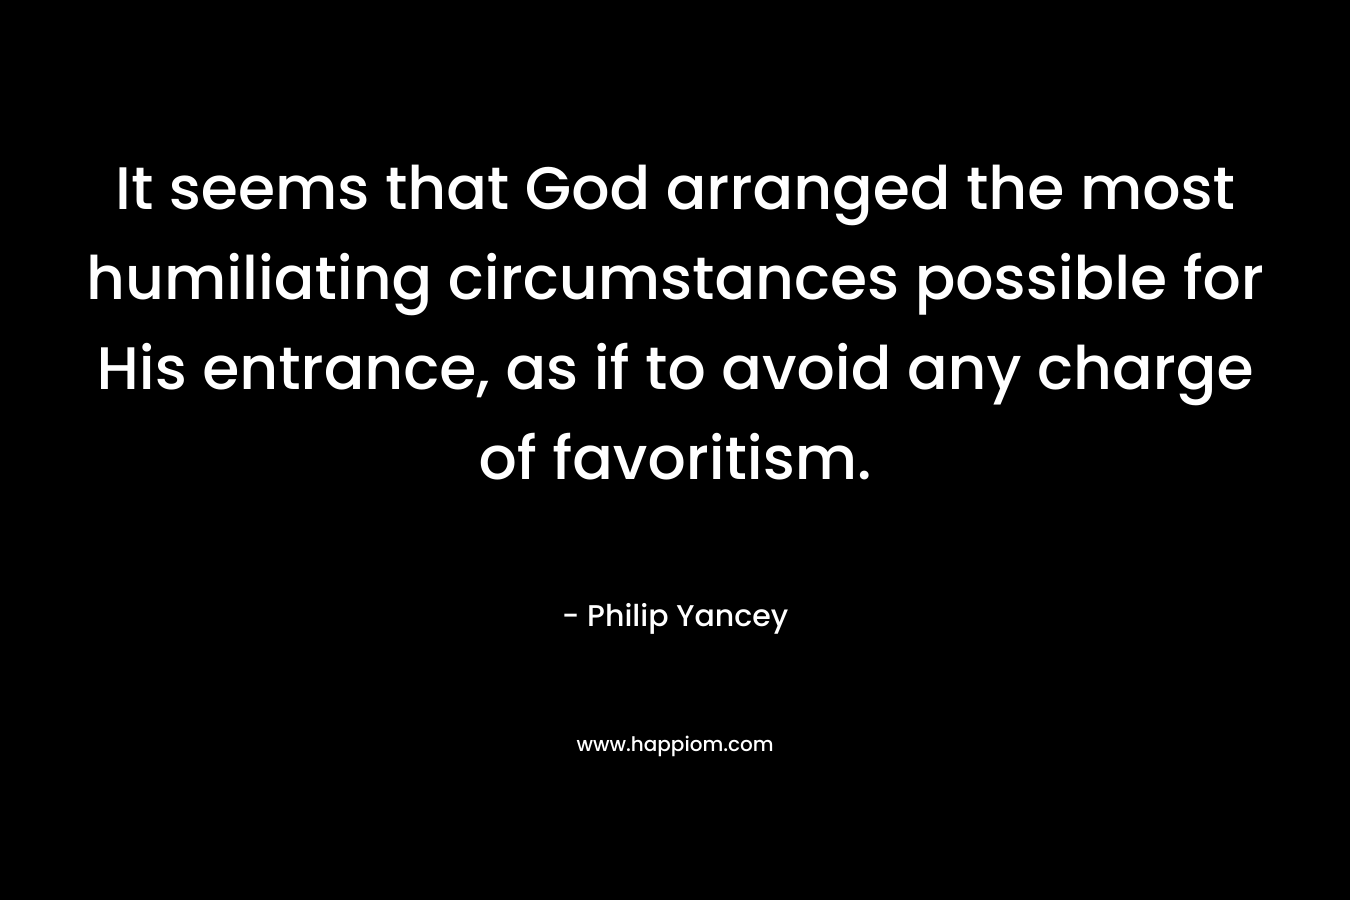 It seems that God arranged the most humiliating circumstances possible for His entrance, as if to avoid any charge of favoritism. – Philip Yancey